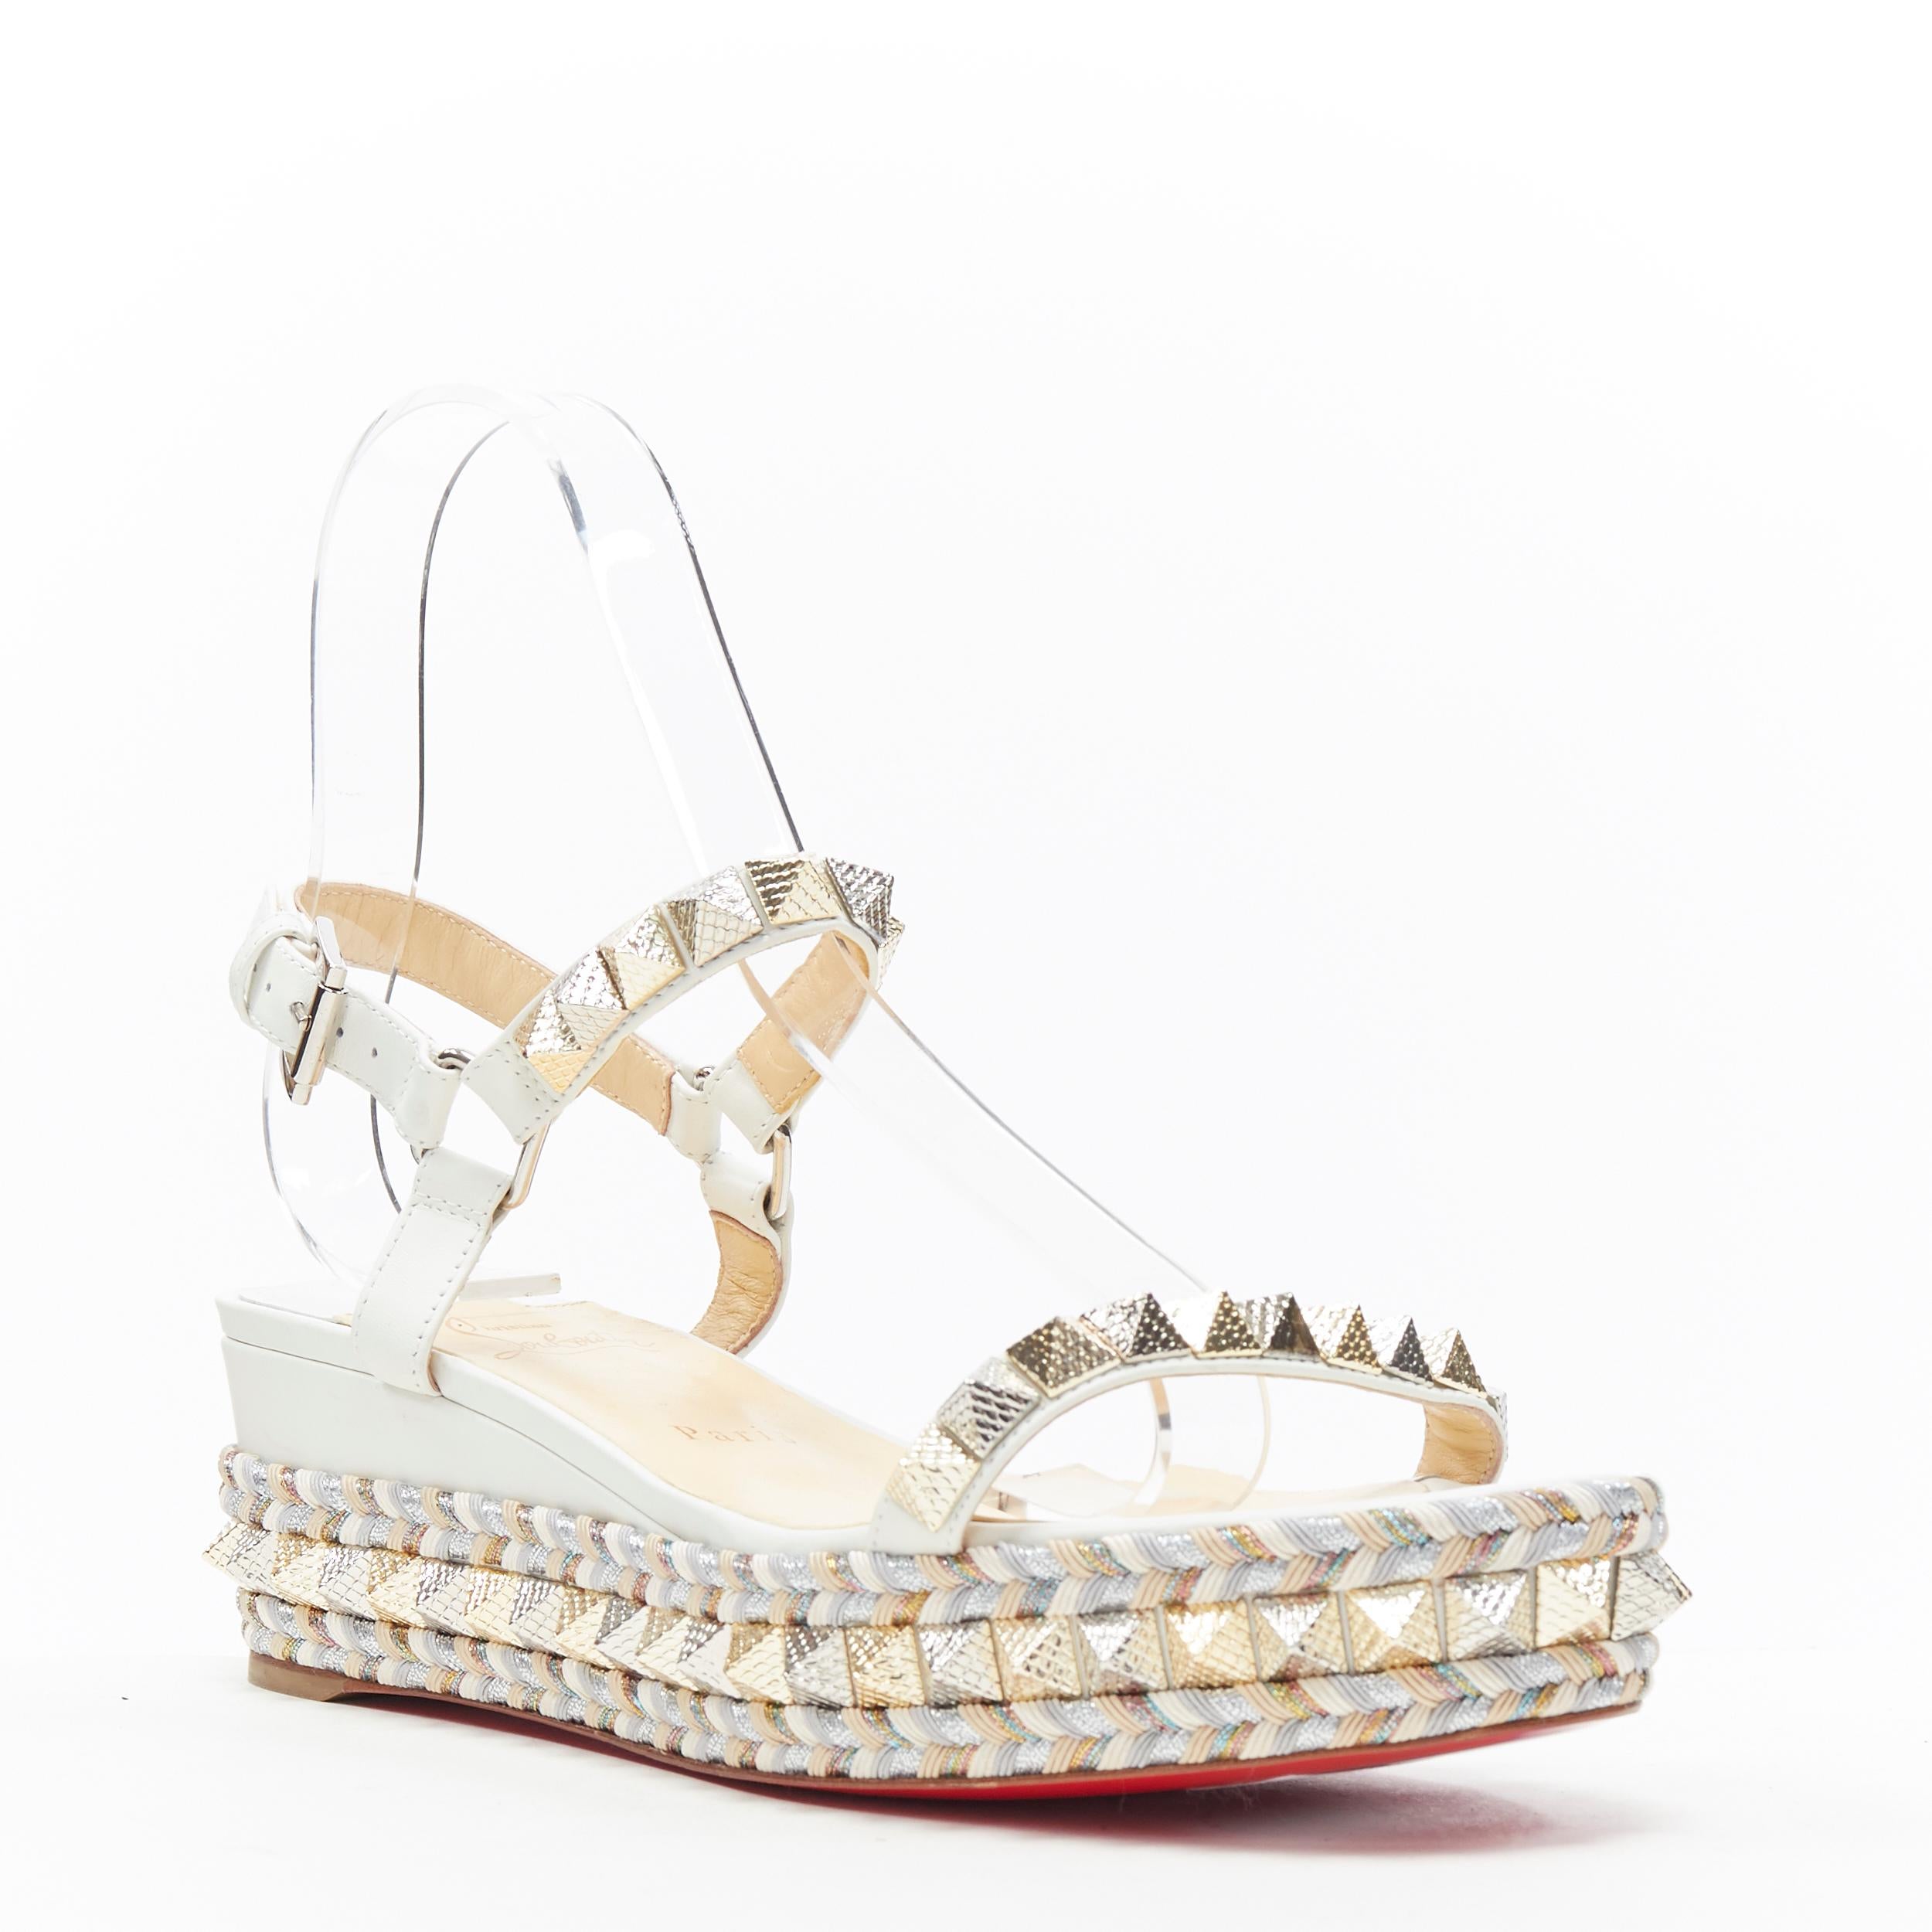 new CHRISTIAN LOUBOUTIN Cataclou embroidery studded espadrille sandals EU40
Brand: Christian Louboutin
Designer: Christian Louboutin
Model Name / Style: Cataclou
Material: Leather
Color: White
Pattern: Abstract
Closure: Ankle strap
Extra Detail: Mid